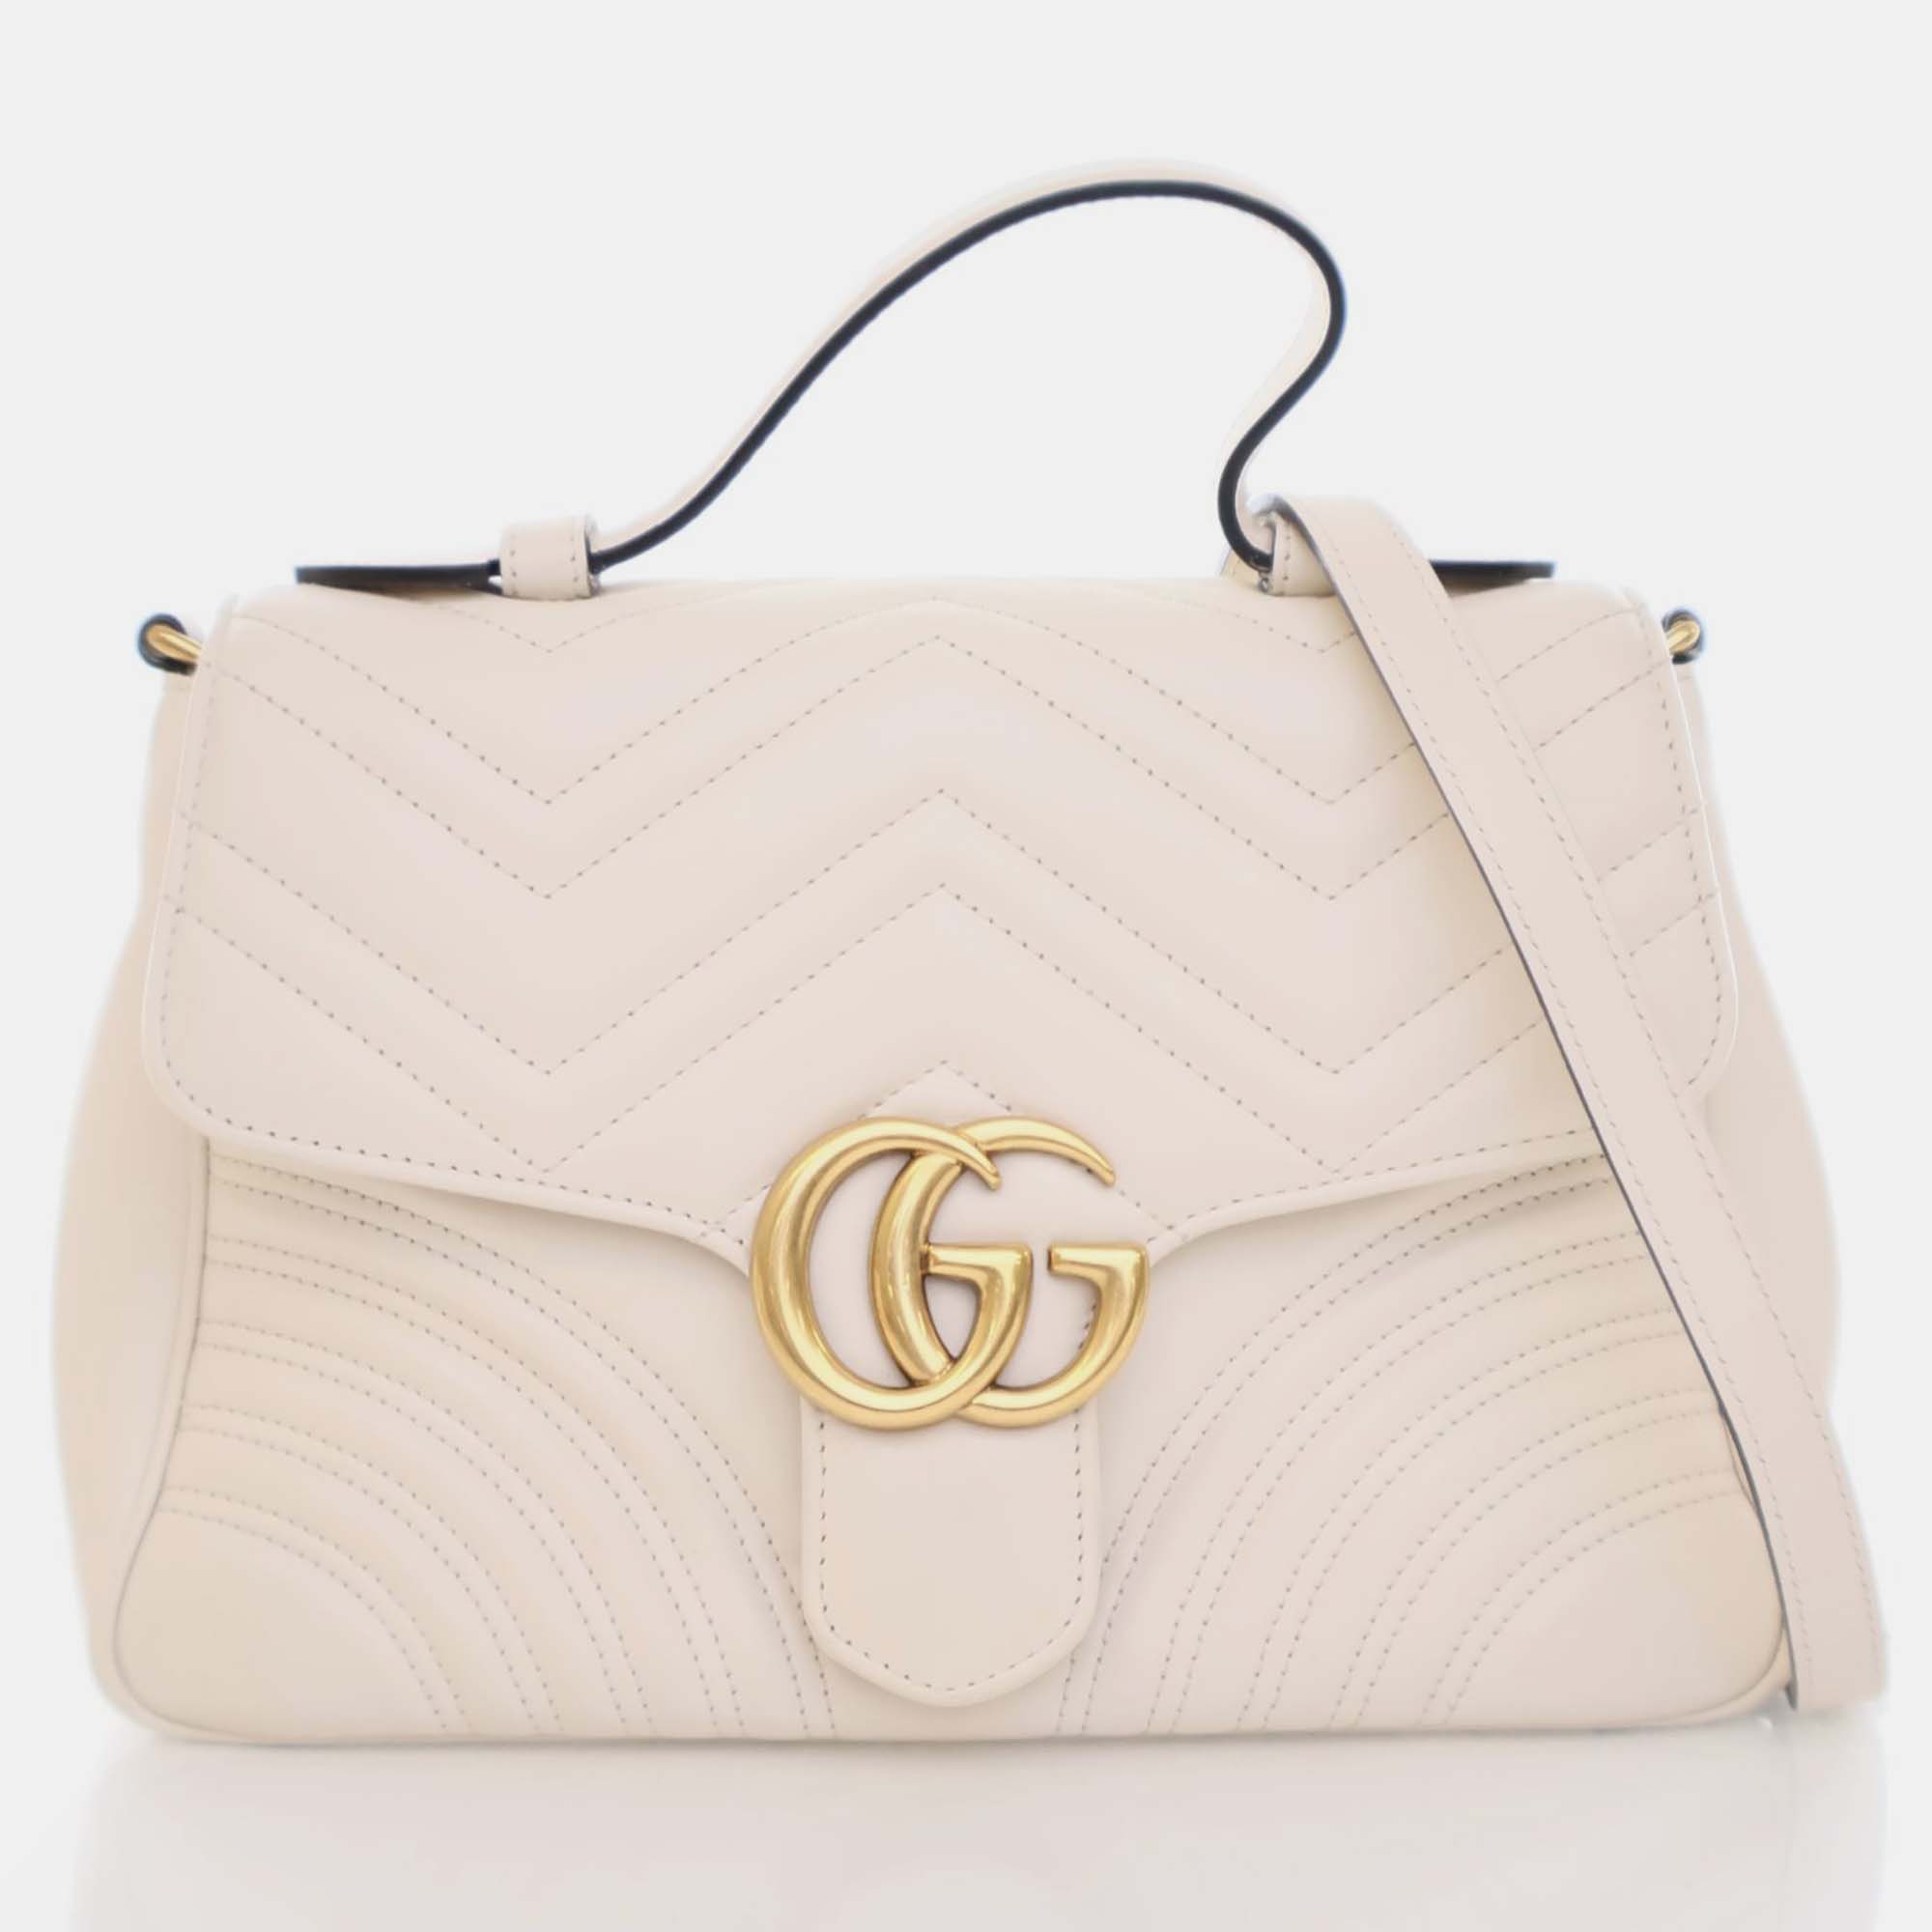 Gucci cream leather small gg marmont top handle bag